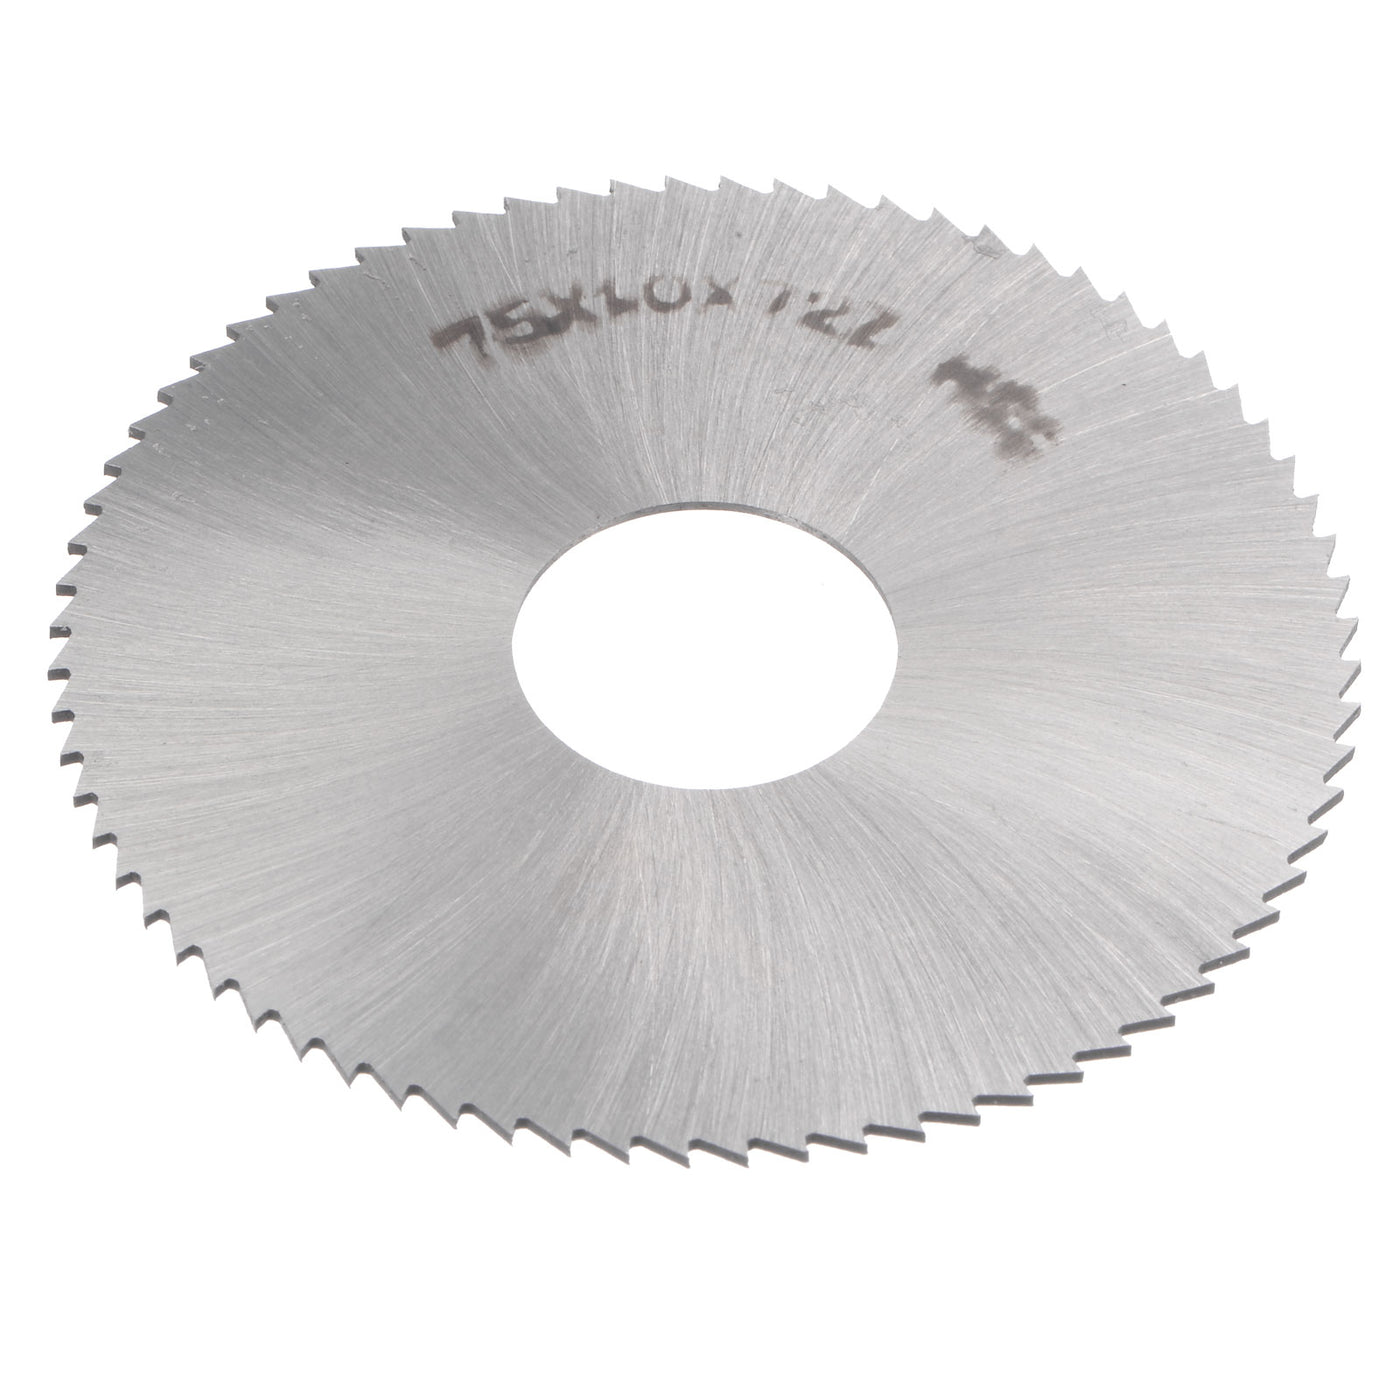 Uxcell Uxcell 75mm Dia 22mm Arbor 0.5mm Thick 72 Tooth High Speed Steel Circular Saw Blade